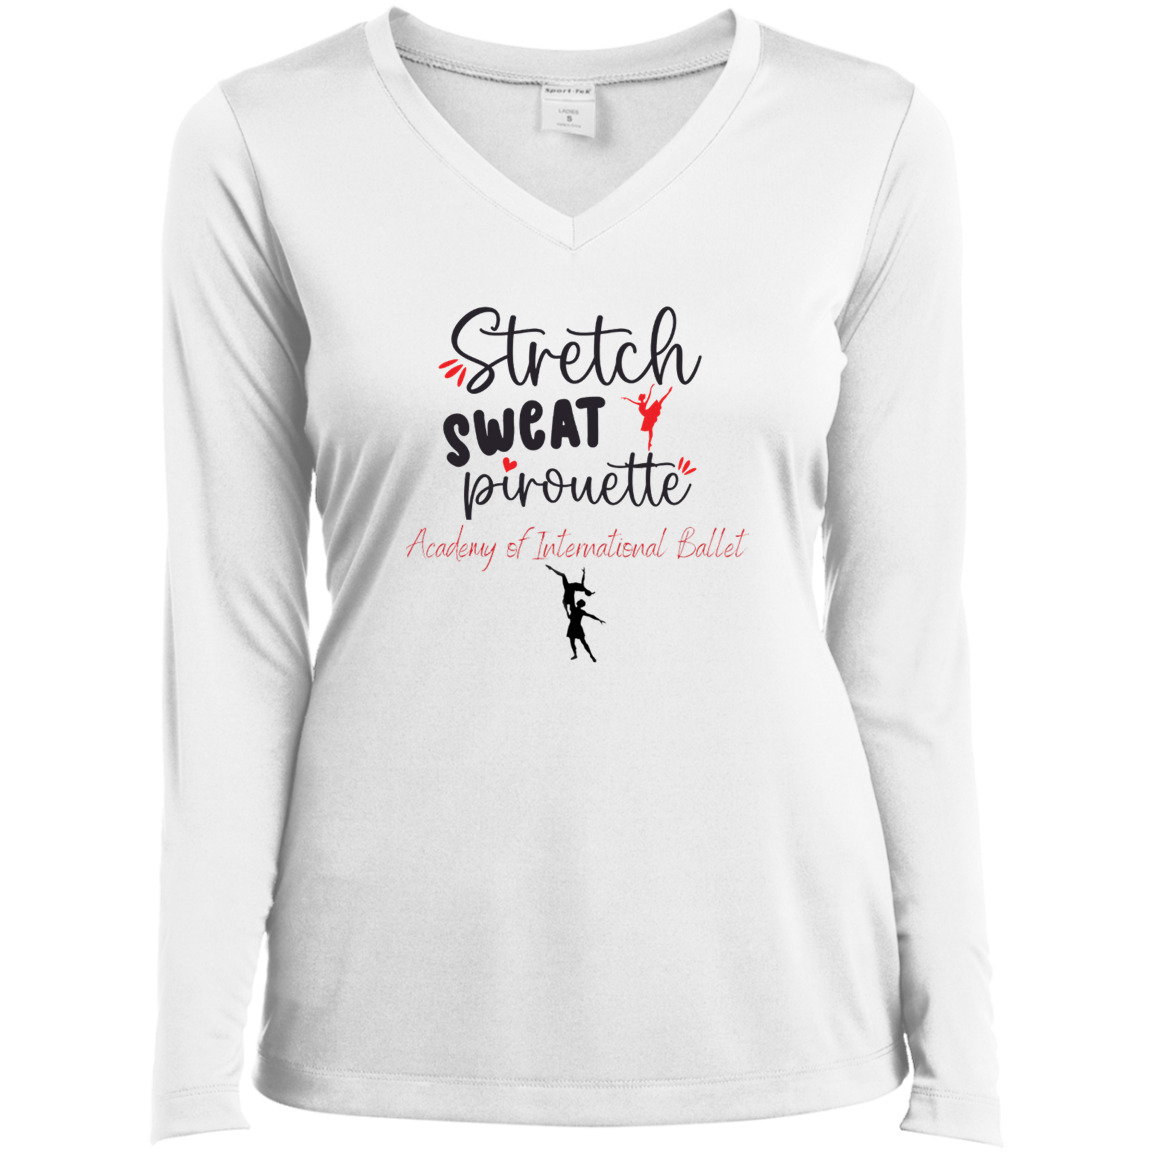 Stretch, Sweat, Pirouette- Ladies’ Long Sleeve Performance V-Neck Tee